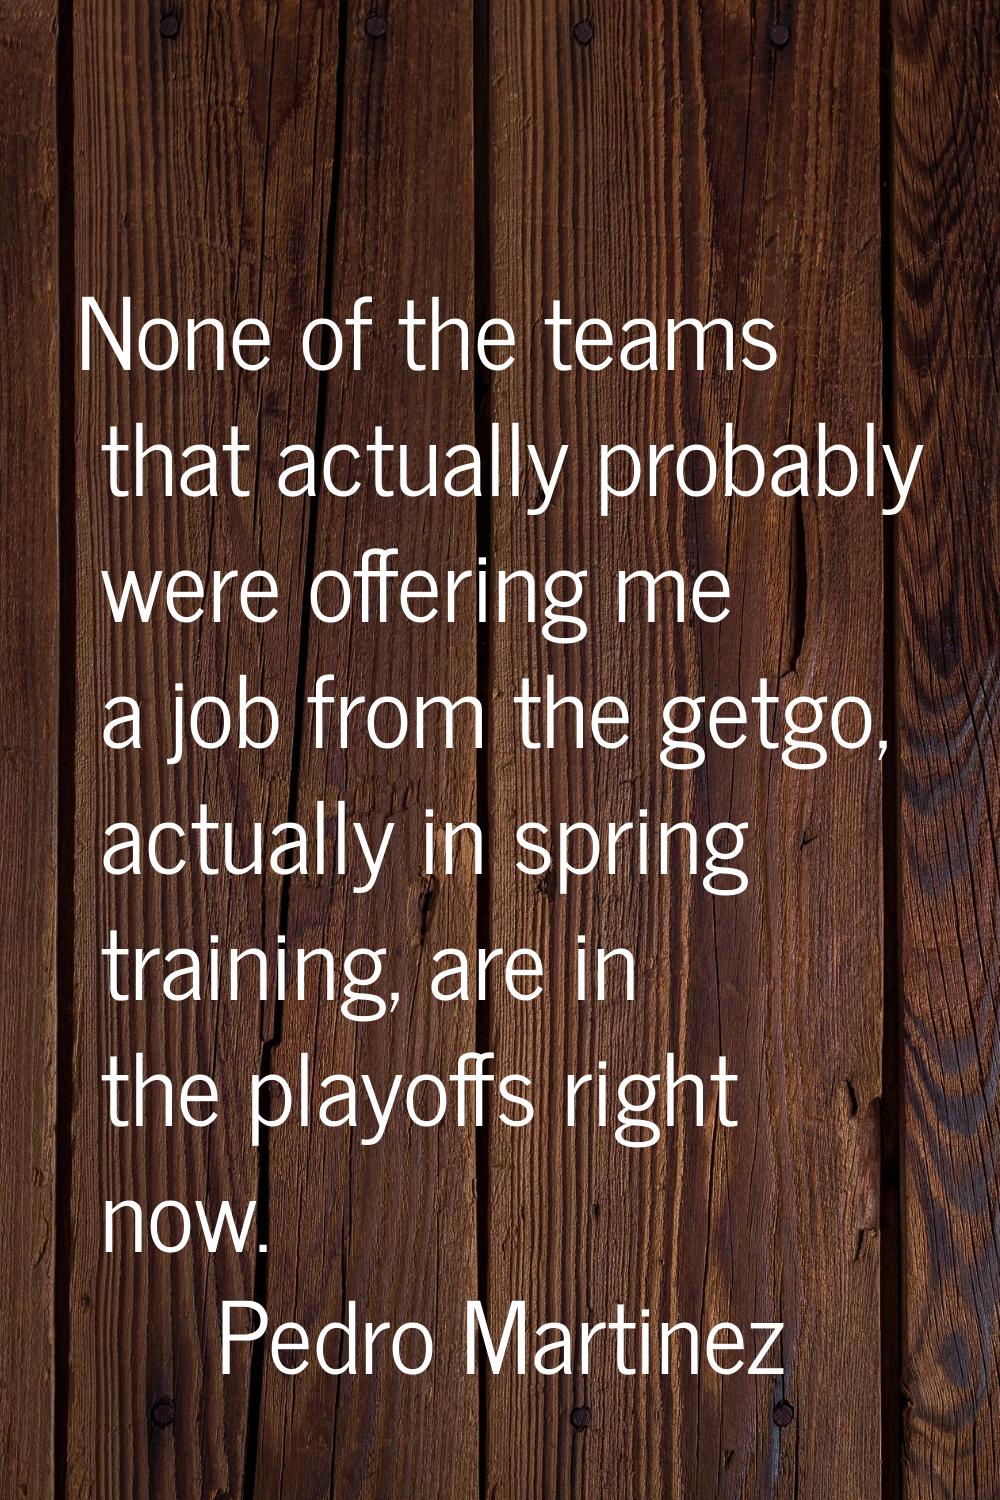 None of the teams that actually probably were offering me a job from the getgo, actually in spring 